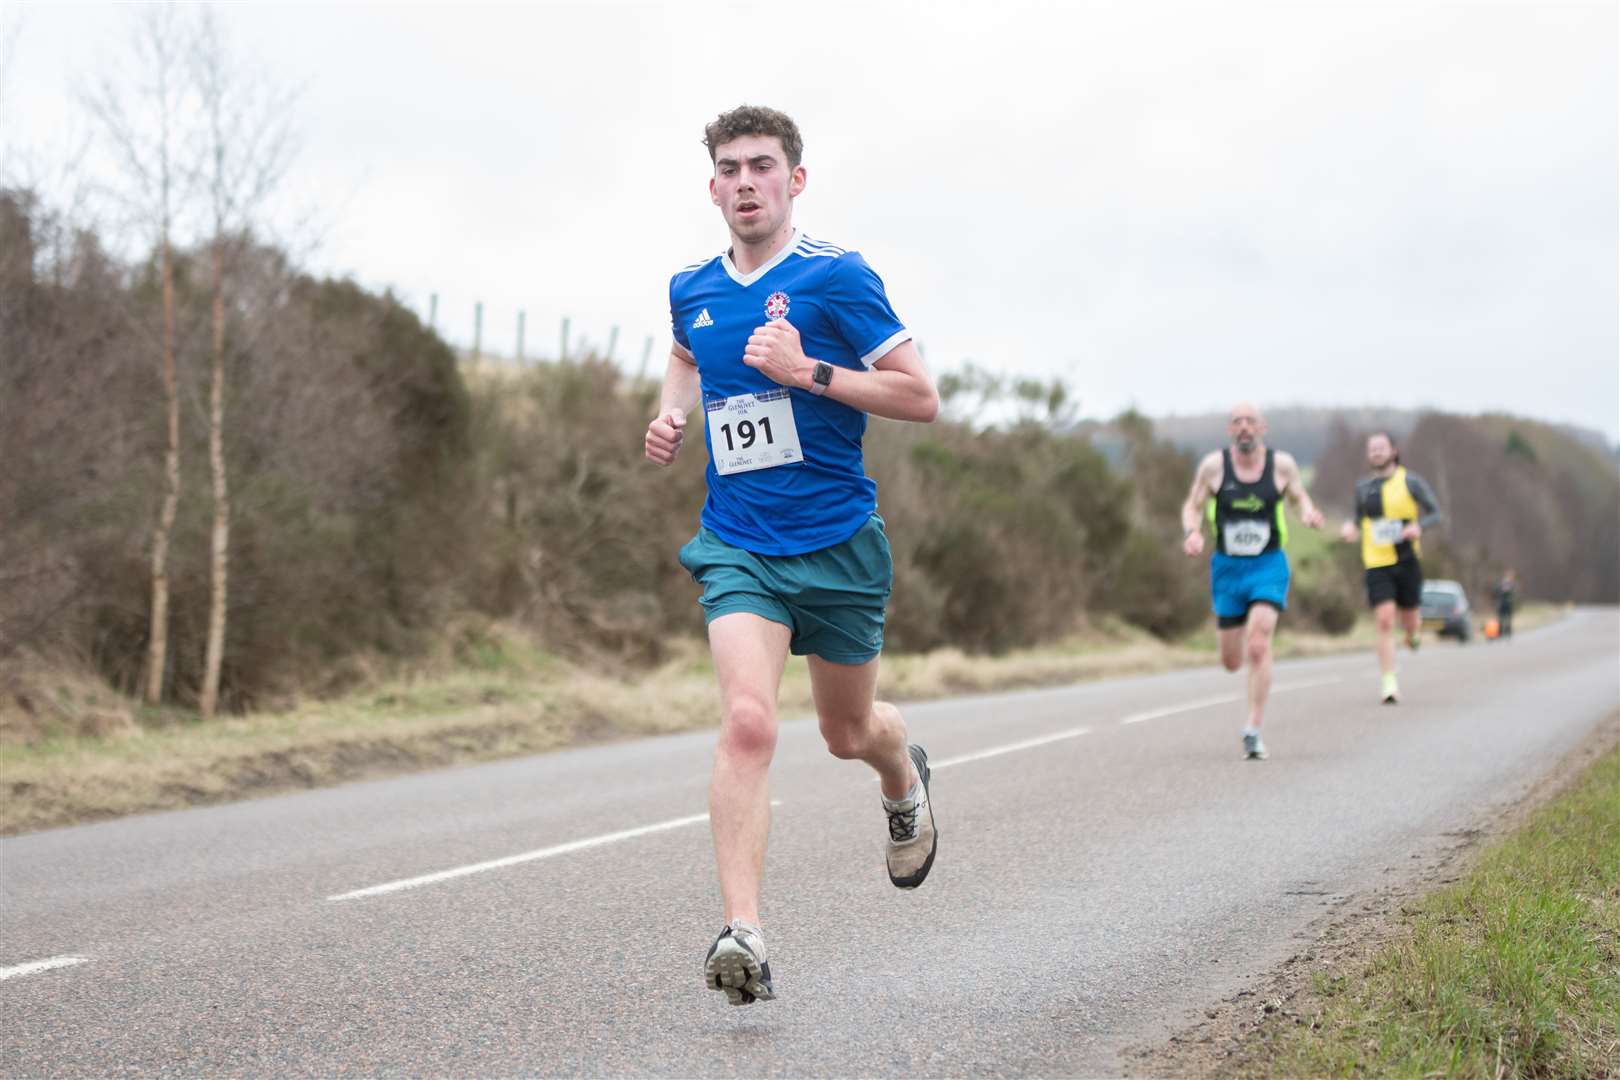 Running with his Lossiemouth FC top on, Jack Levy, who finished 11th overall with a time of 40:43...2023 Glenlivet 10k Race, which raises money for Chest Heart & Stroke Scotland. .. Picture: Daniel Forsyth..